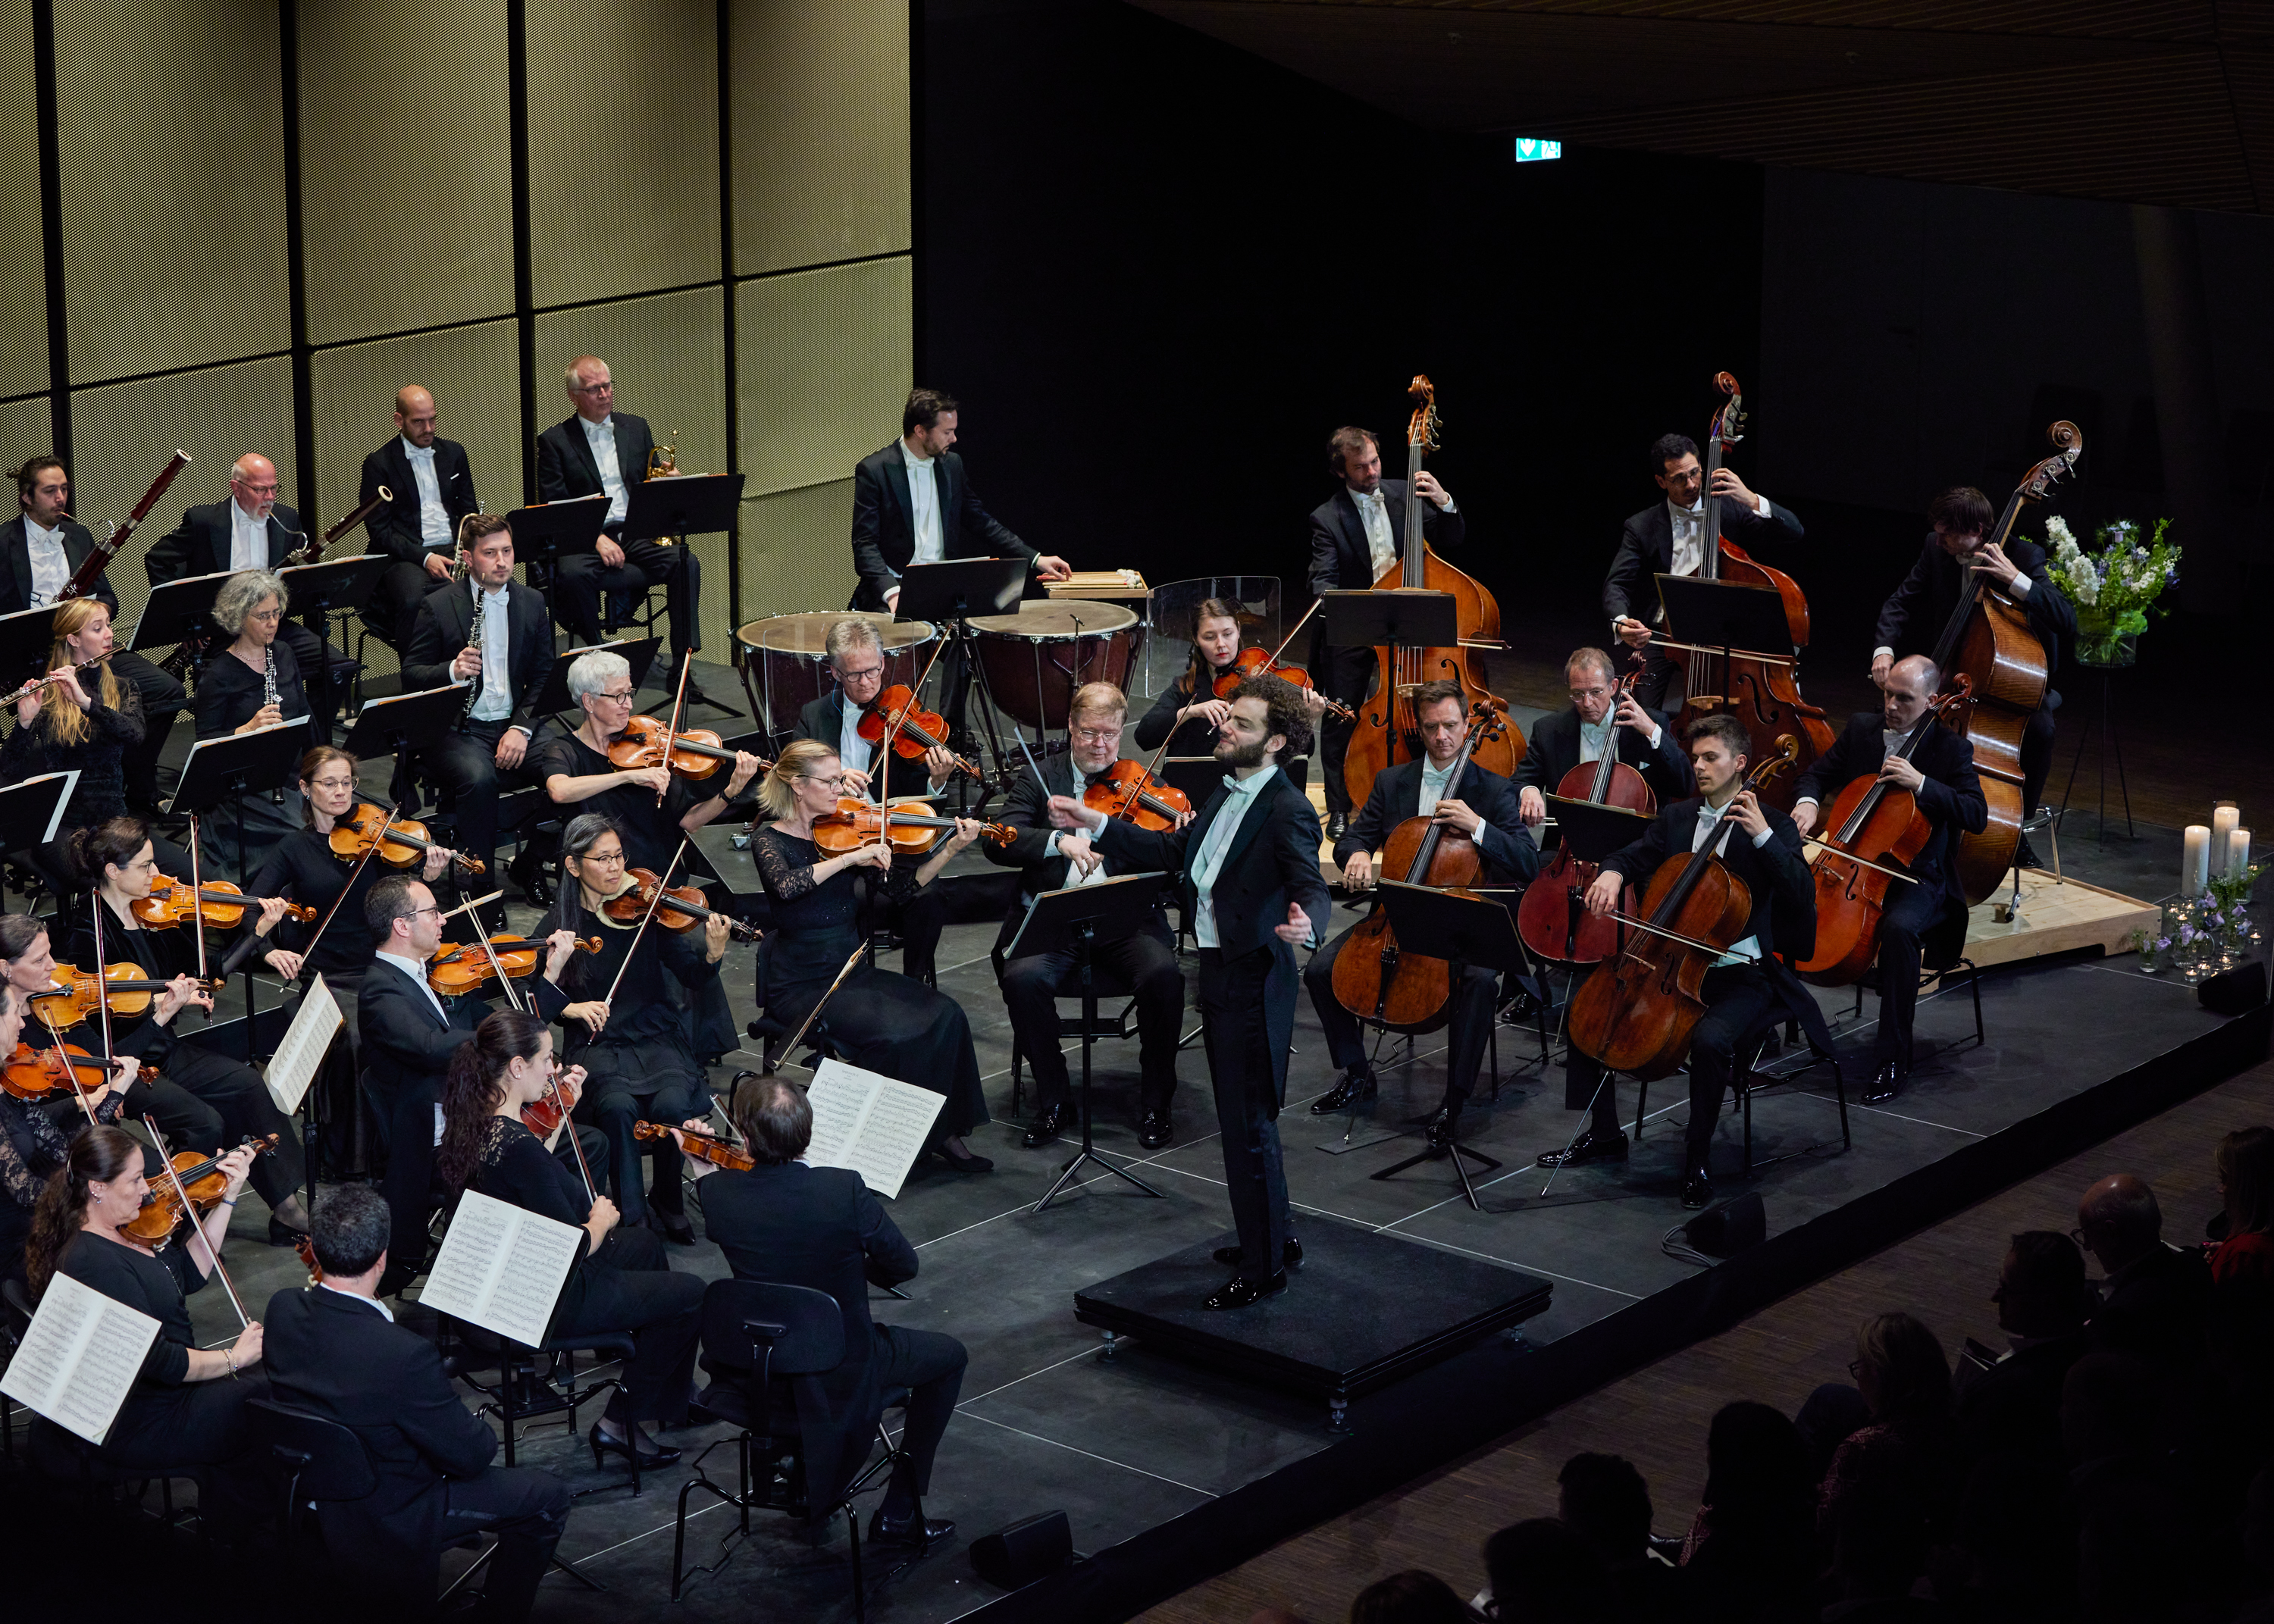 The MAILÄNDER SCALA plays in Andermatt? One of the most famous orchestras in the world?